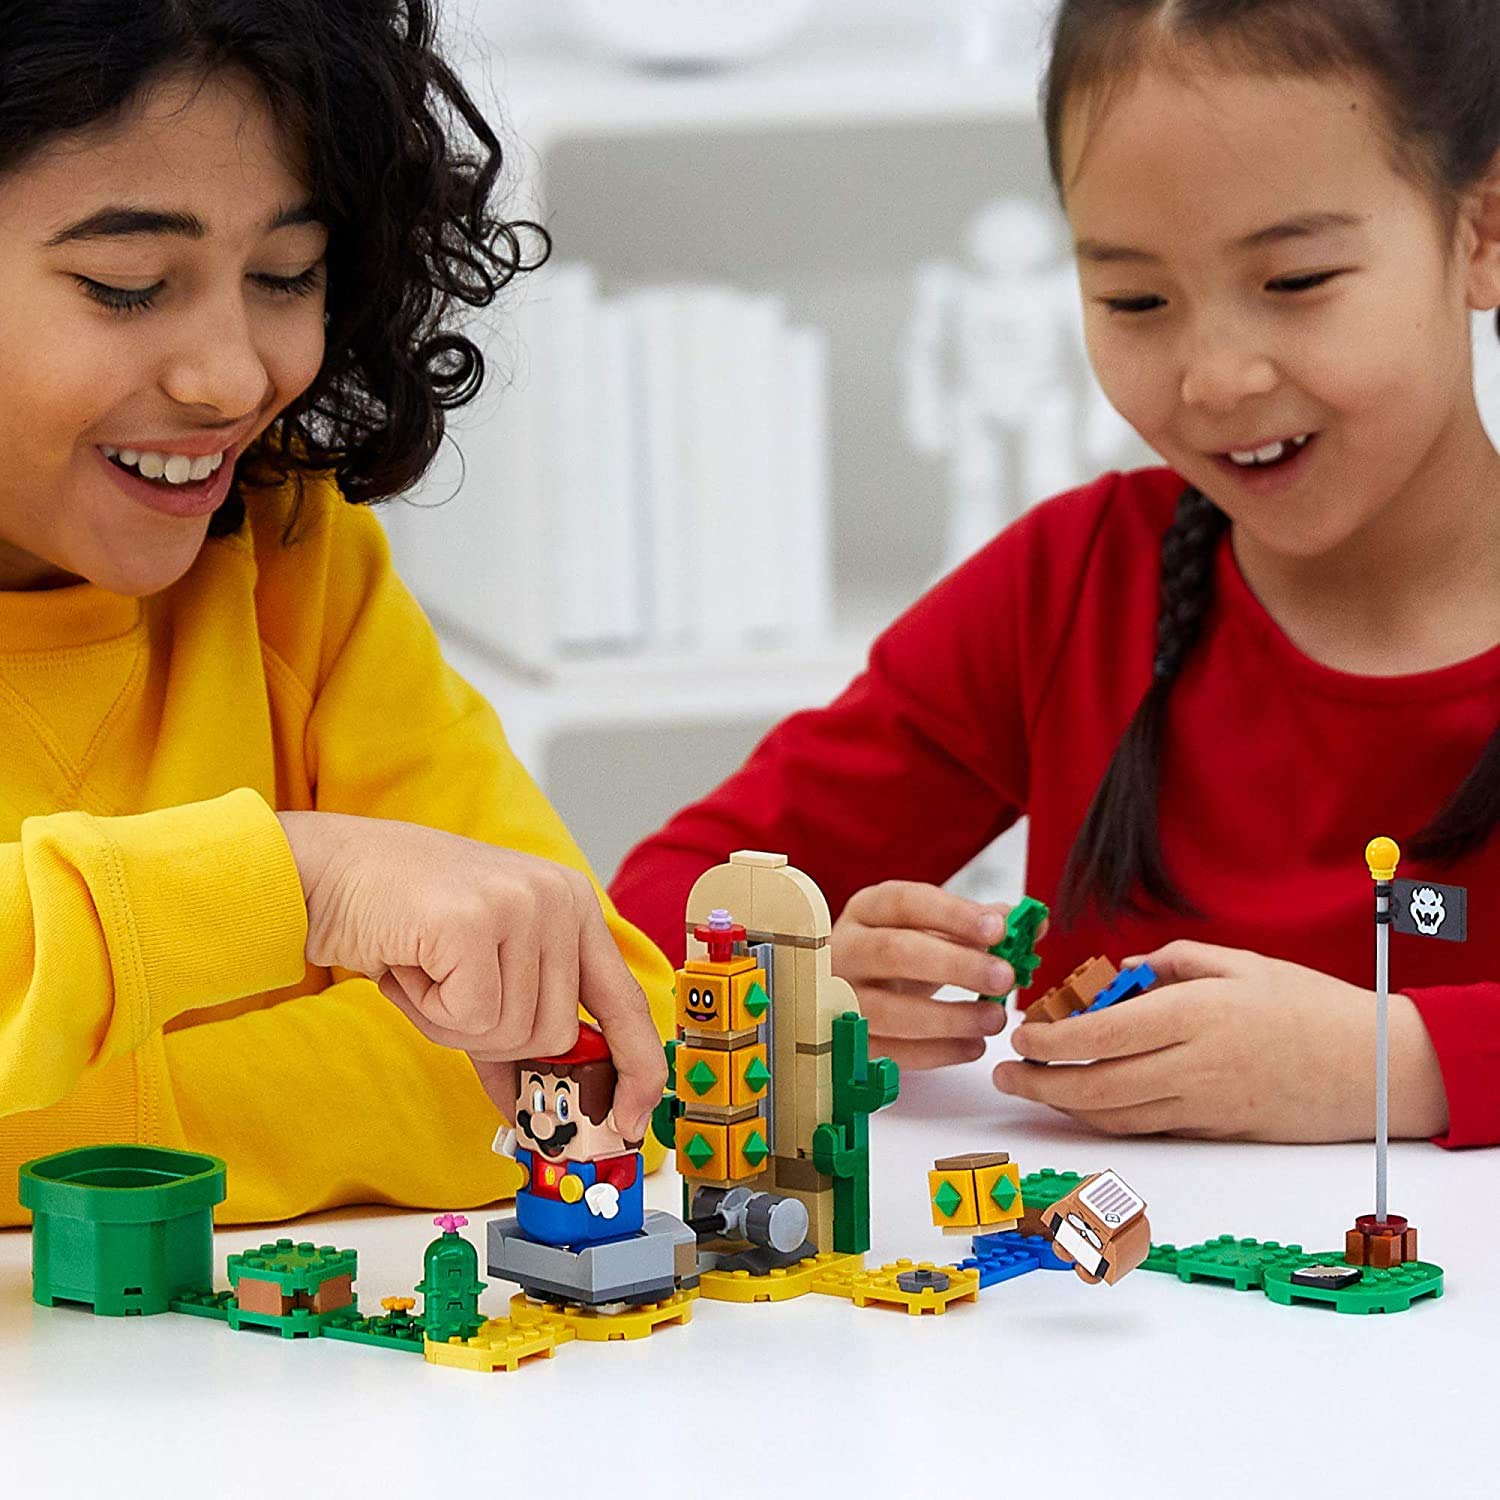 LEGO Super Mario Desert Pokey Expansion Set 71363 Building Kit; Toy for Creative Kids to Combine with The Super Mario Adventures with Mario Starter Course (71360) Playset (180 Pieces)